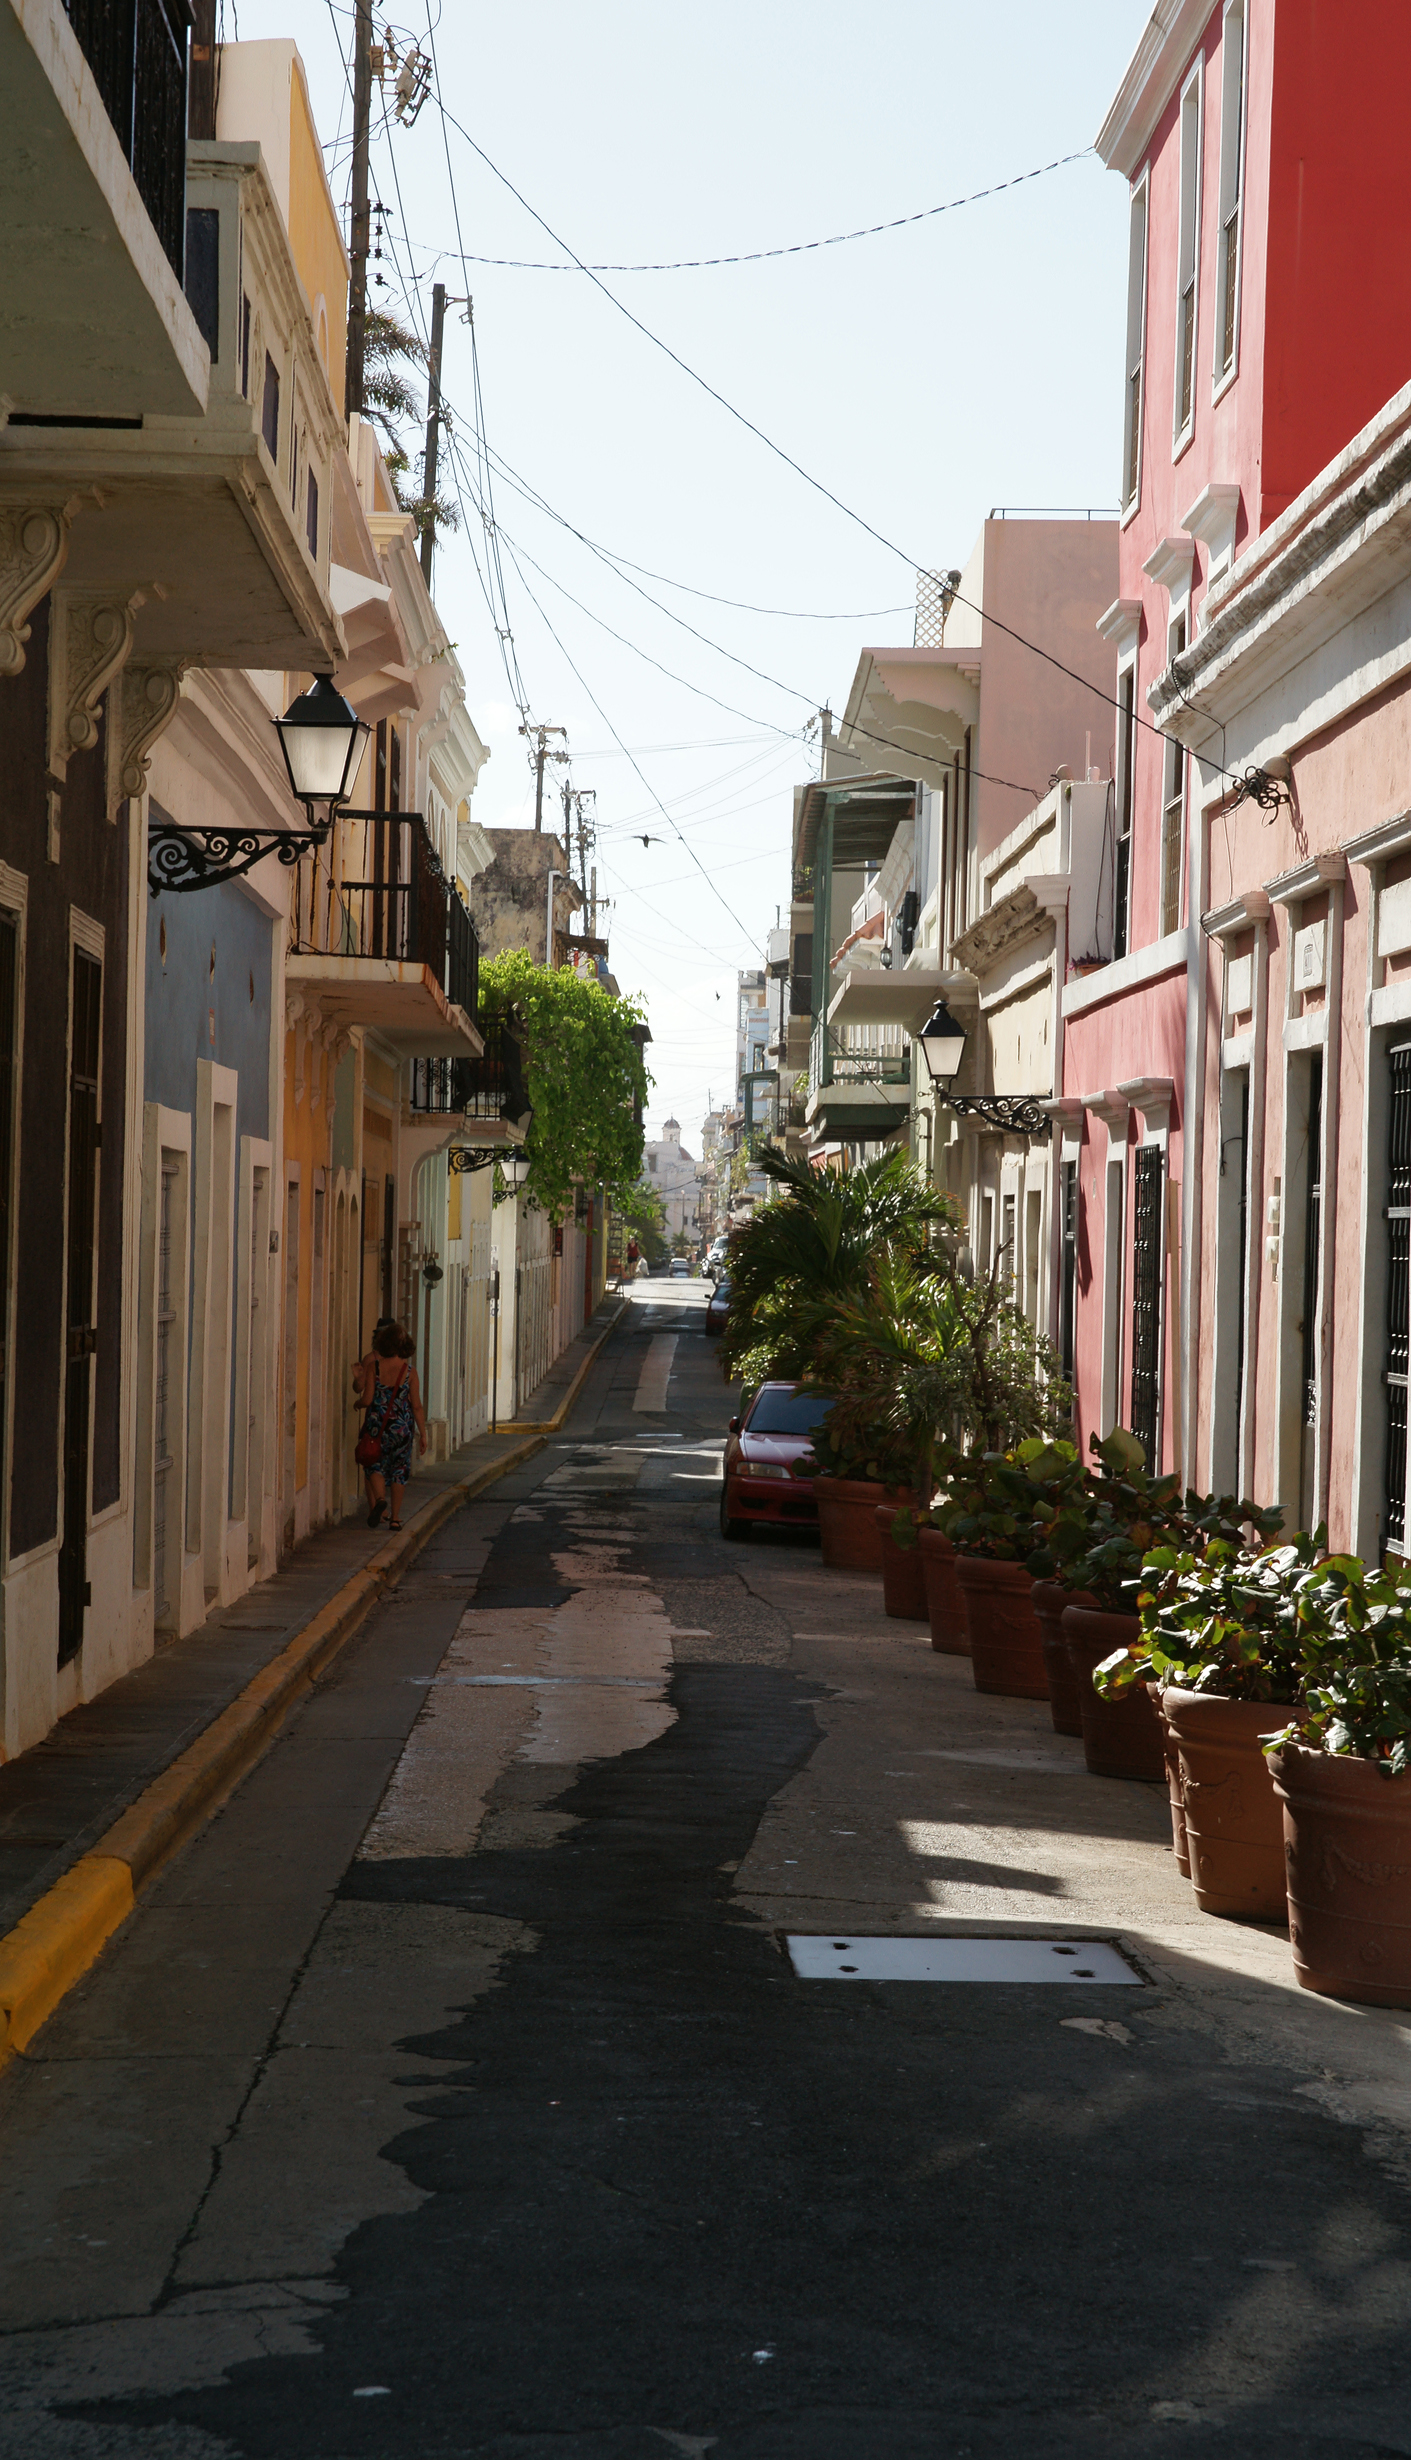 A view down a quiet, colorful street in Old San Juan.